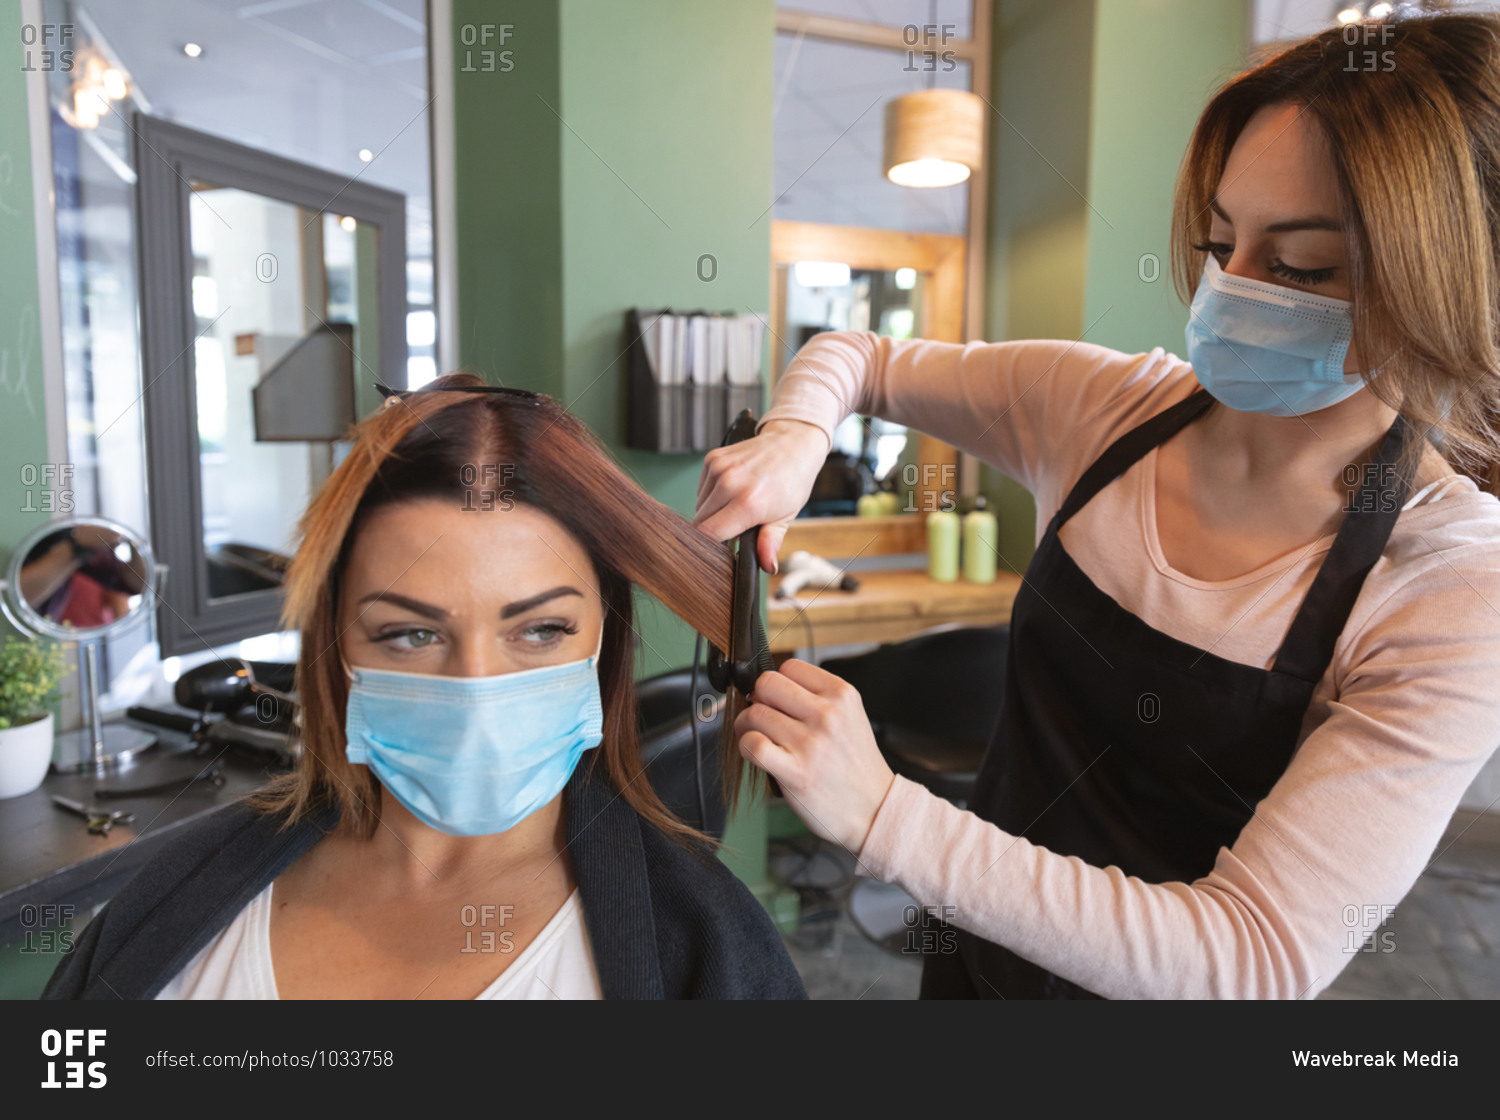 Caucasian female hairdresser working in hair salon wearing face mask straightening hair of female Caucasian customer in face mask. Health and hygiene in workplace during Coronavirus Covid 19 pandemic.